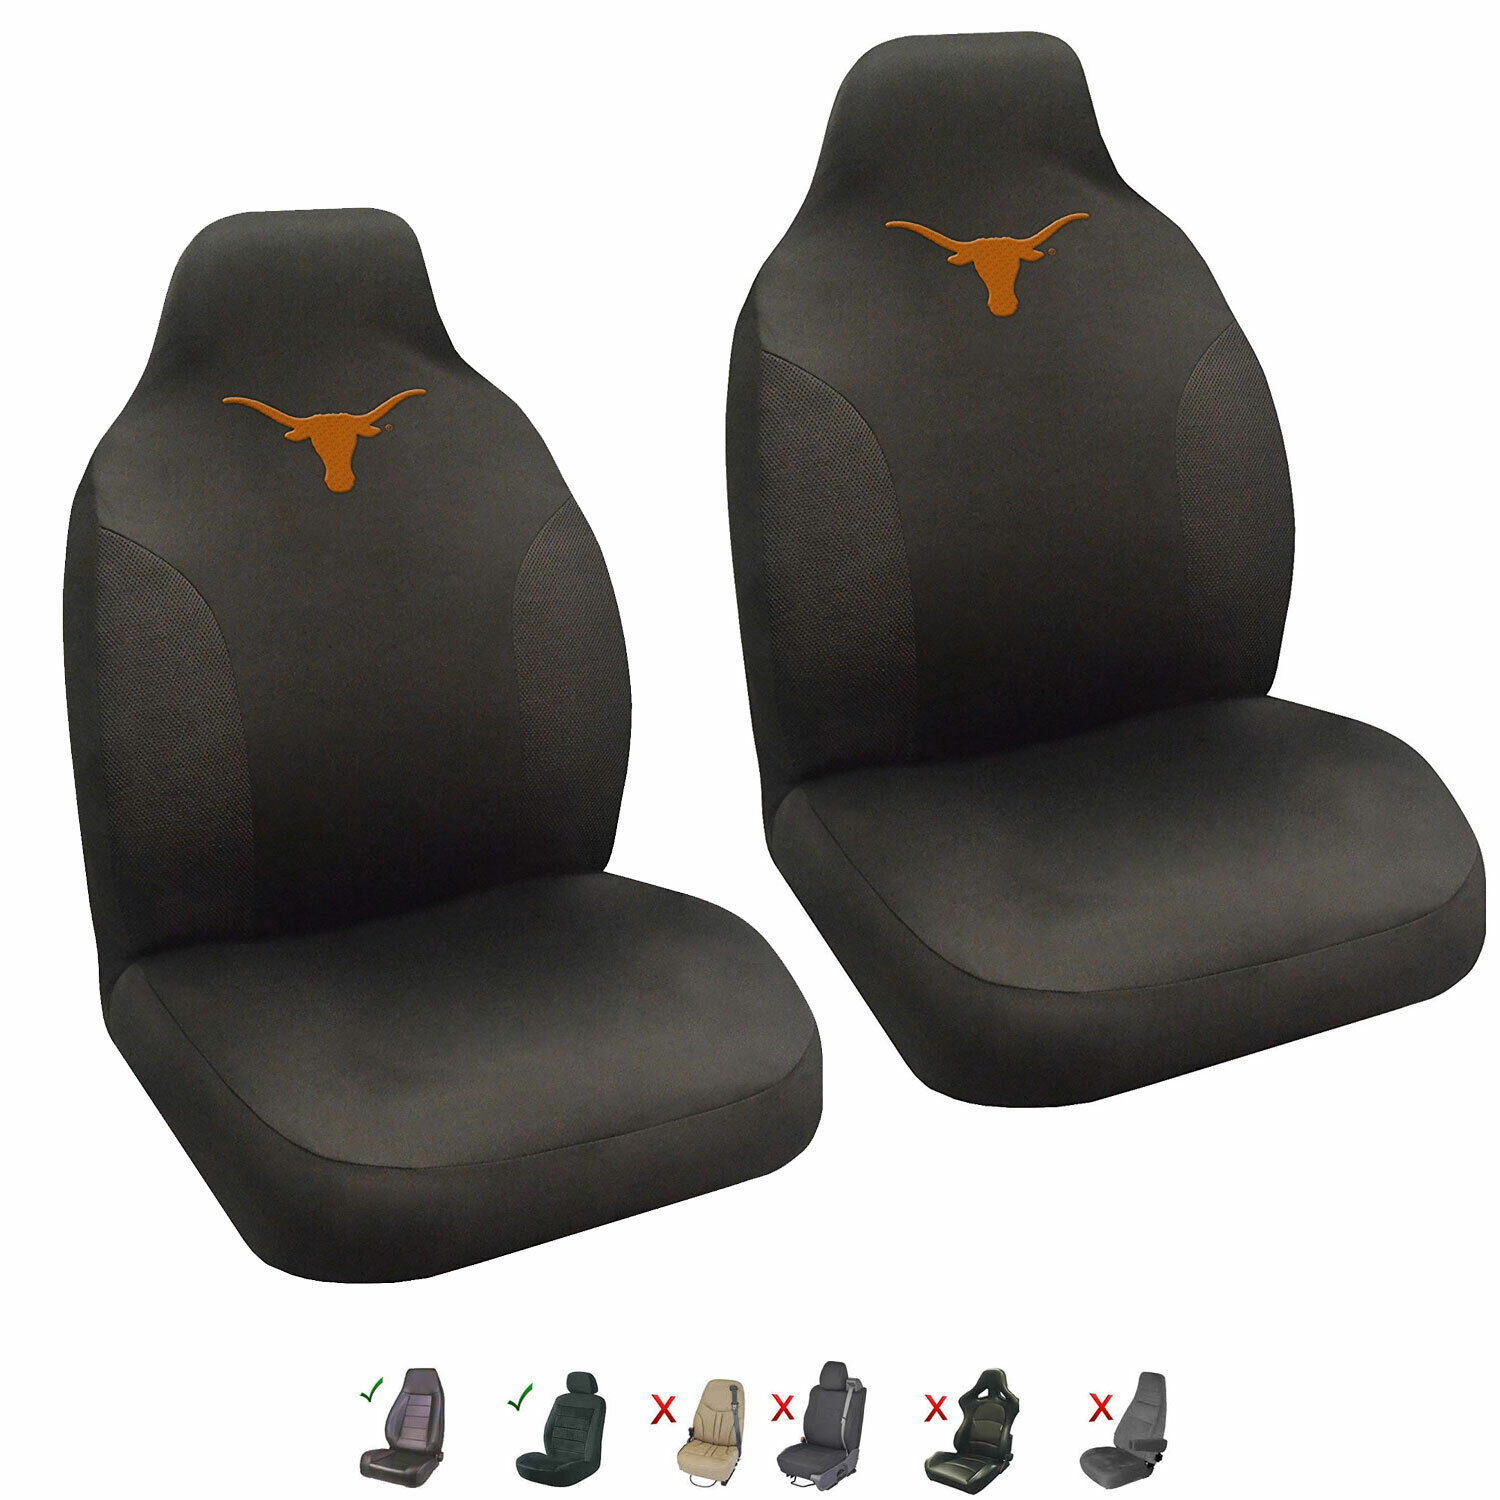 New 2PC NCAA Texas Longhorns Car Truck SUV Front Seat Covers Set